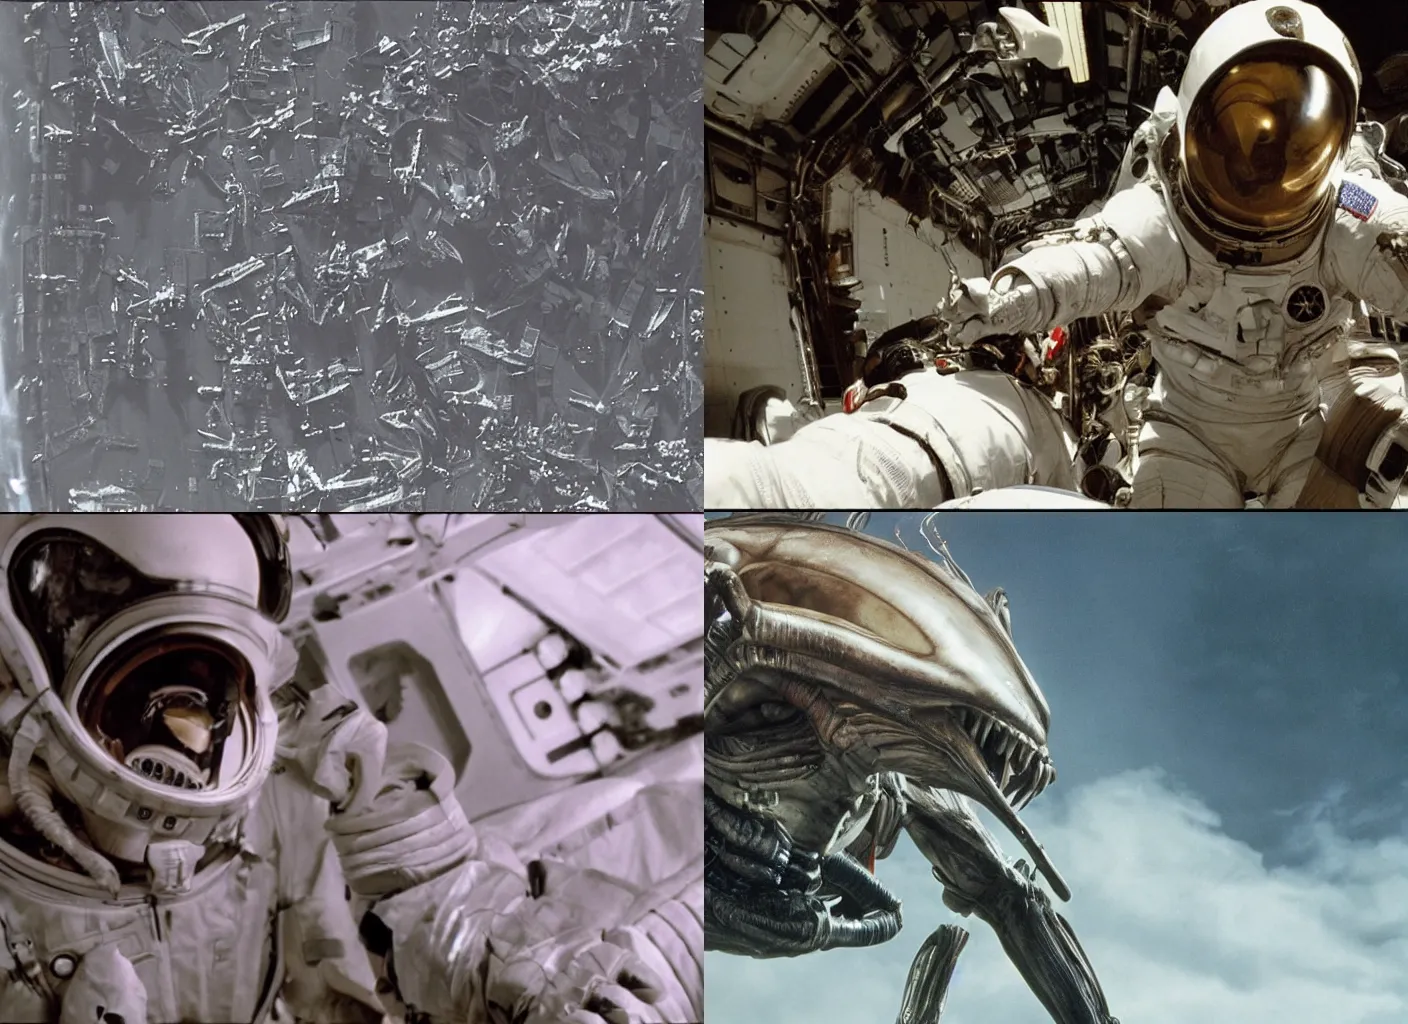 Prompt: xenomorph attack, xenomorphs, astronauts, space shuttle, apollo 1 1, the movie alien, high definition, grainy footage, color footage, landscape, medium length photography